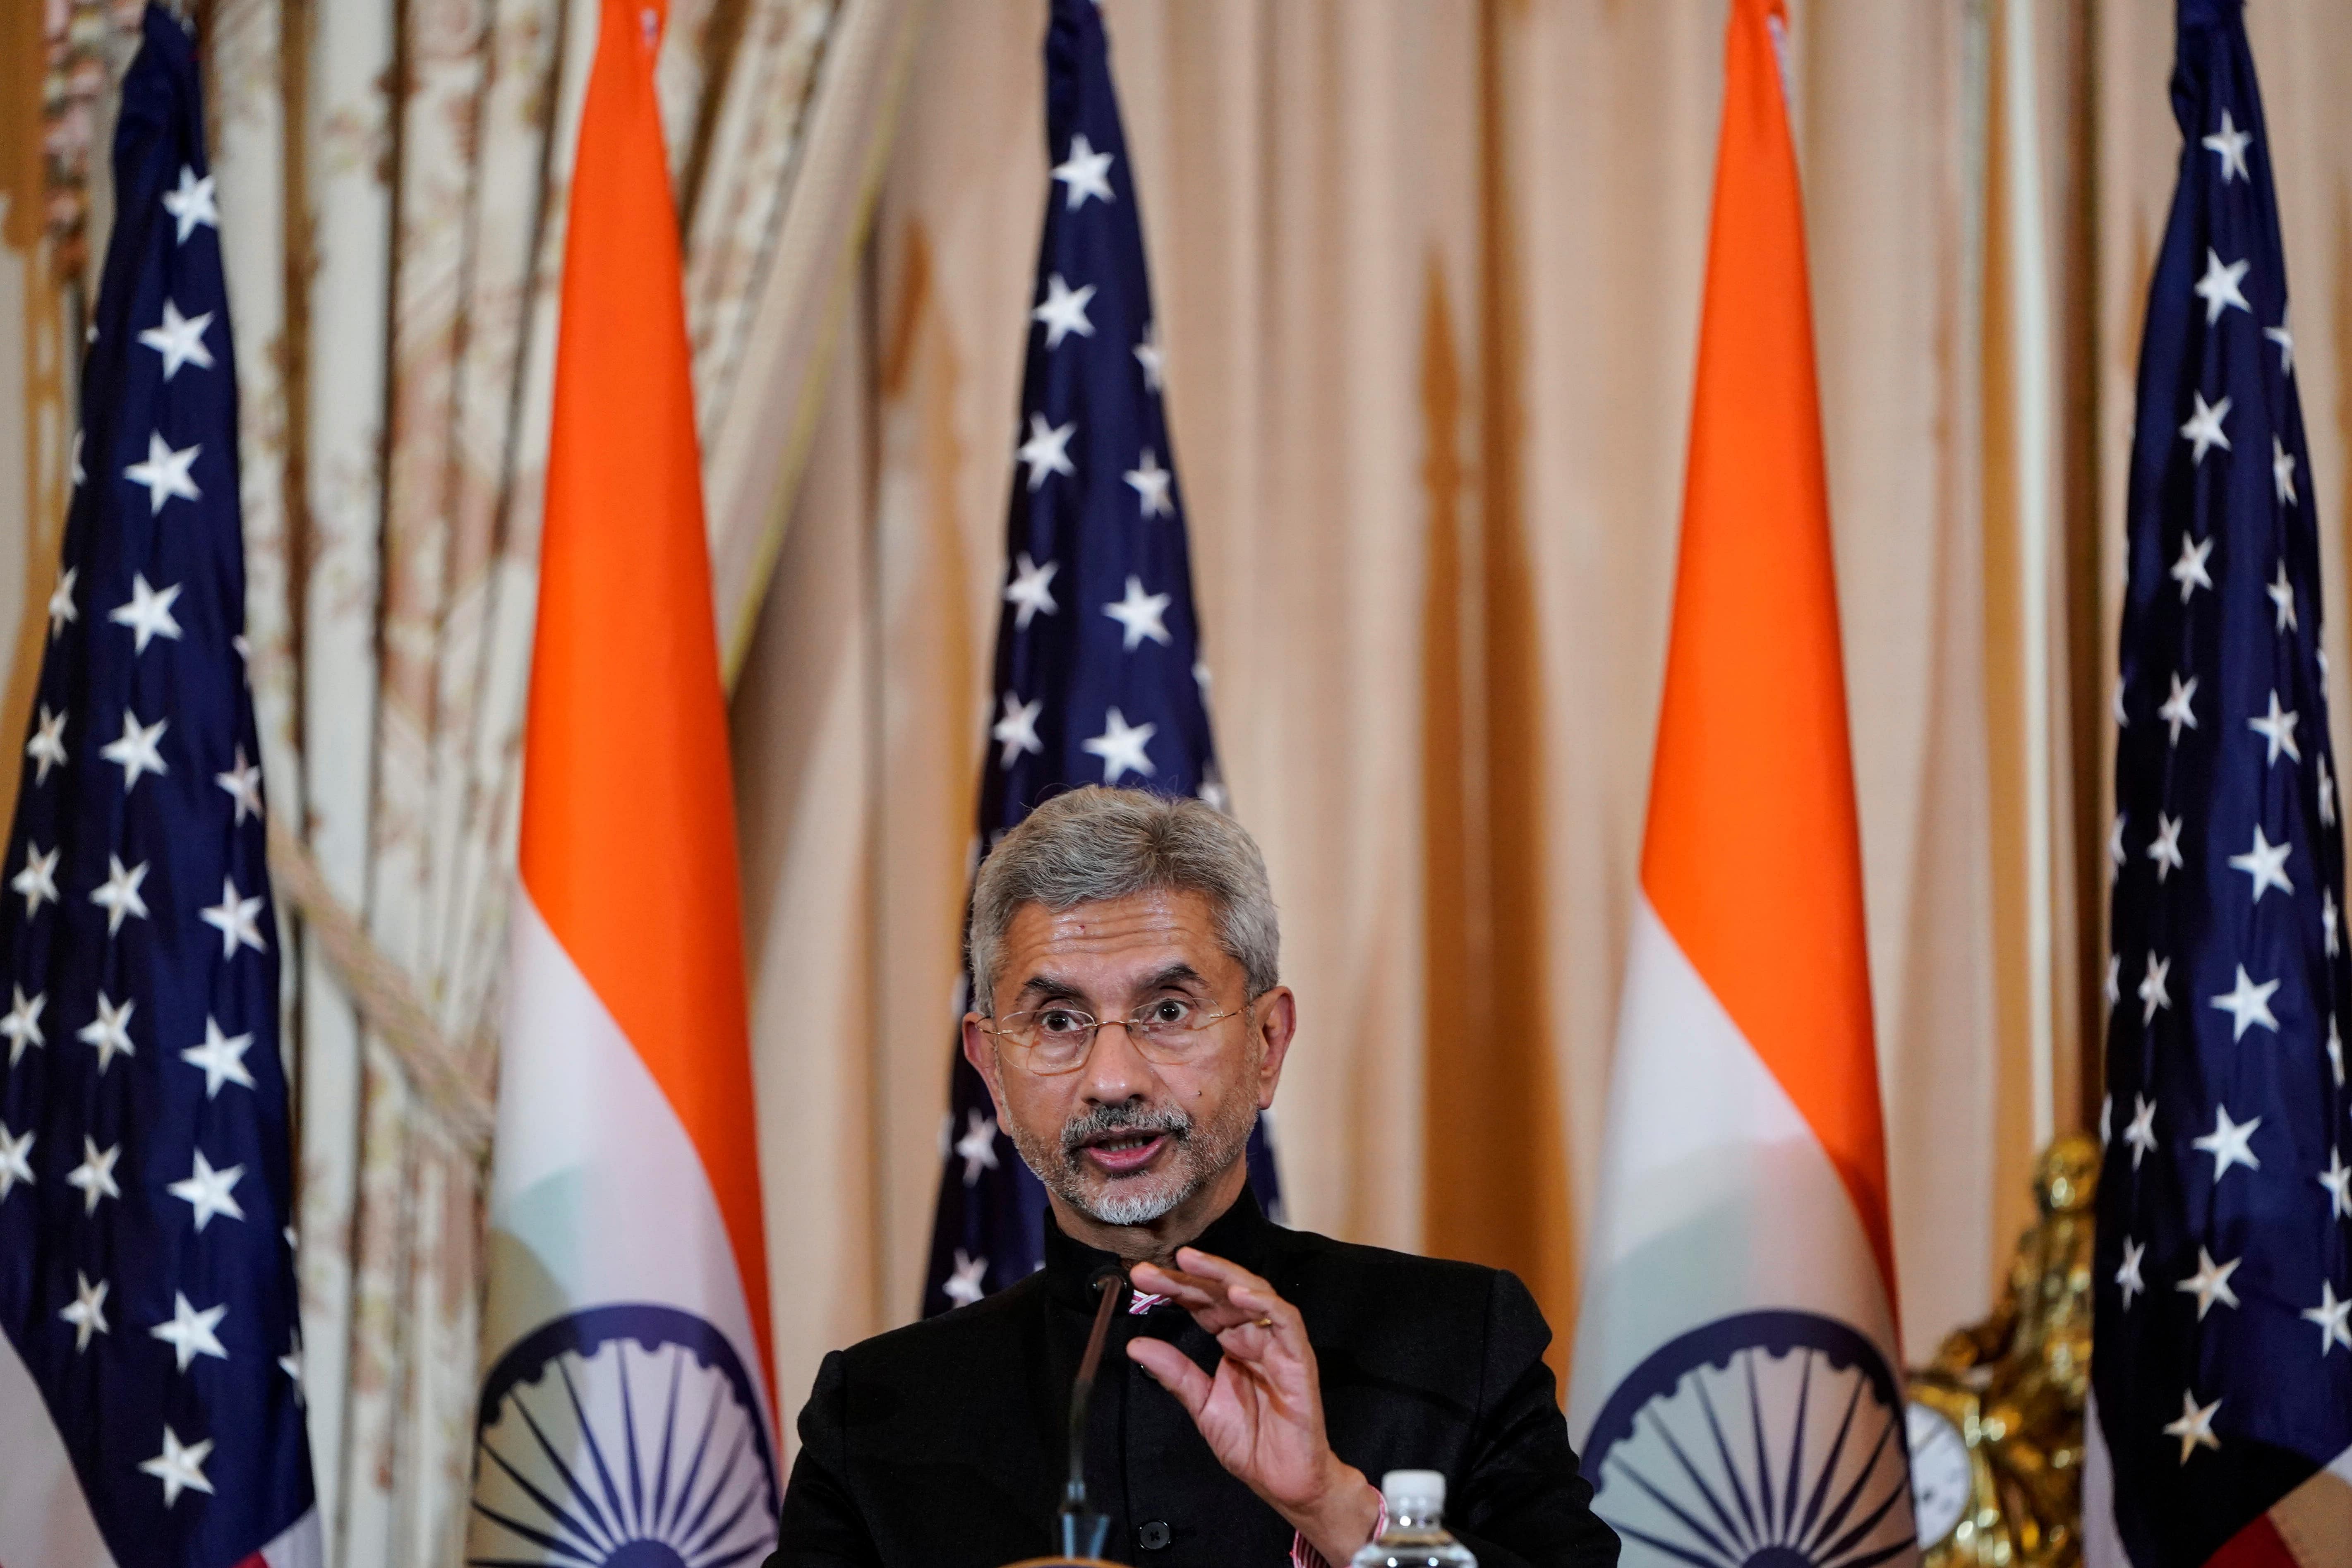 Indian Minister of External Affairs Subrahmanyam Jaishankar speaks to the media after the 2019 U.S.-India 2+2 Ministerial Dialogue at the State Department in Washington, U.S., December 18, 2019. (Reuters Photo)